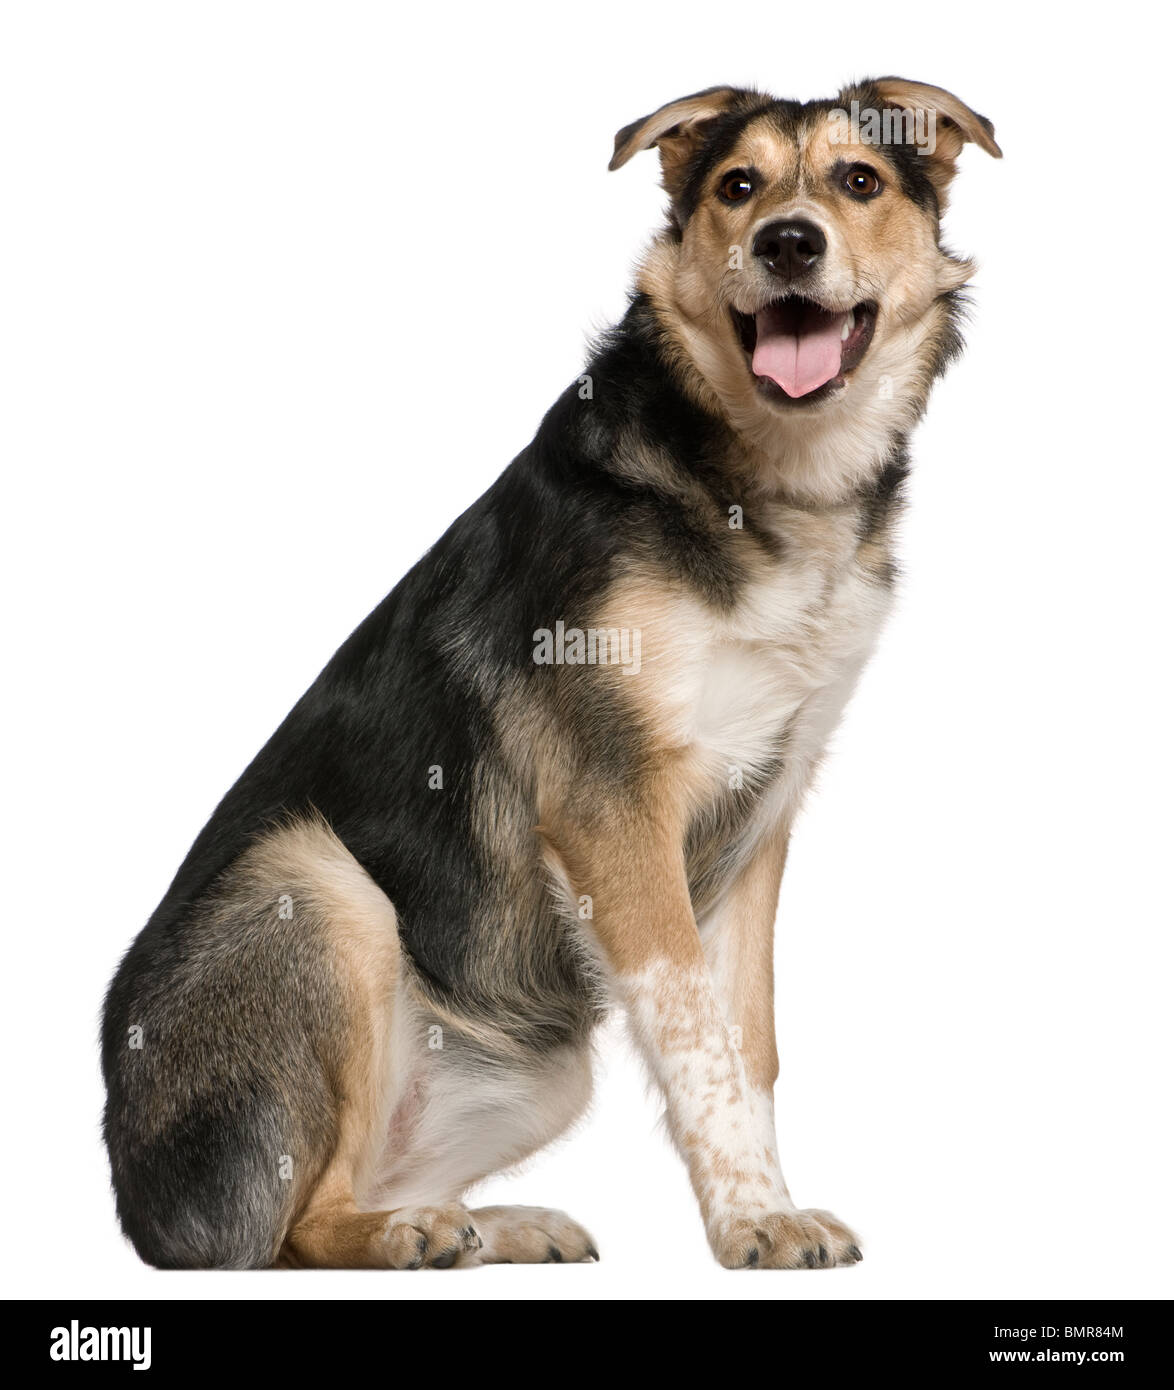 Mixed Australian shepherd dog, 8 months old, sitting in front of white background Stock Photo